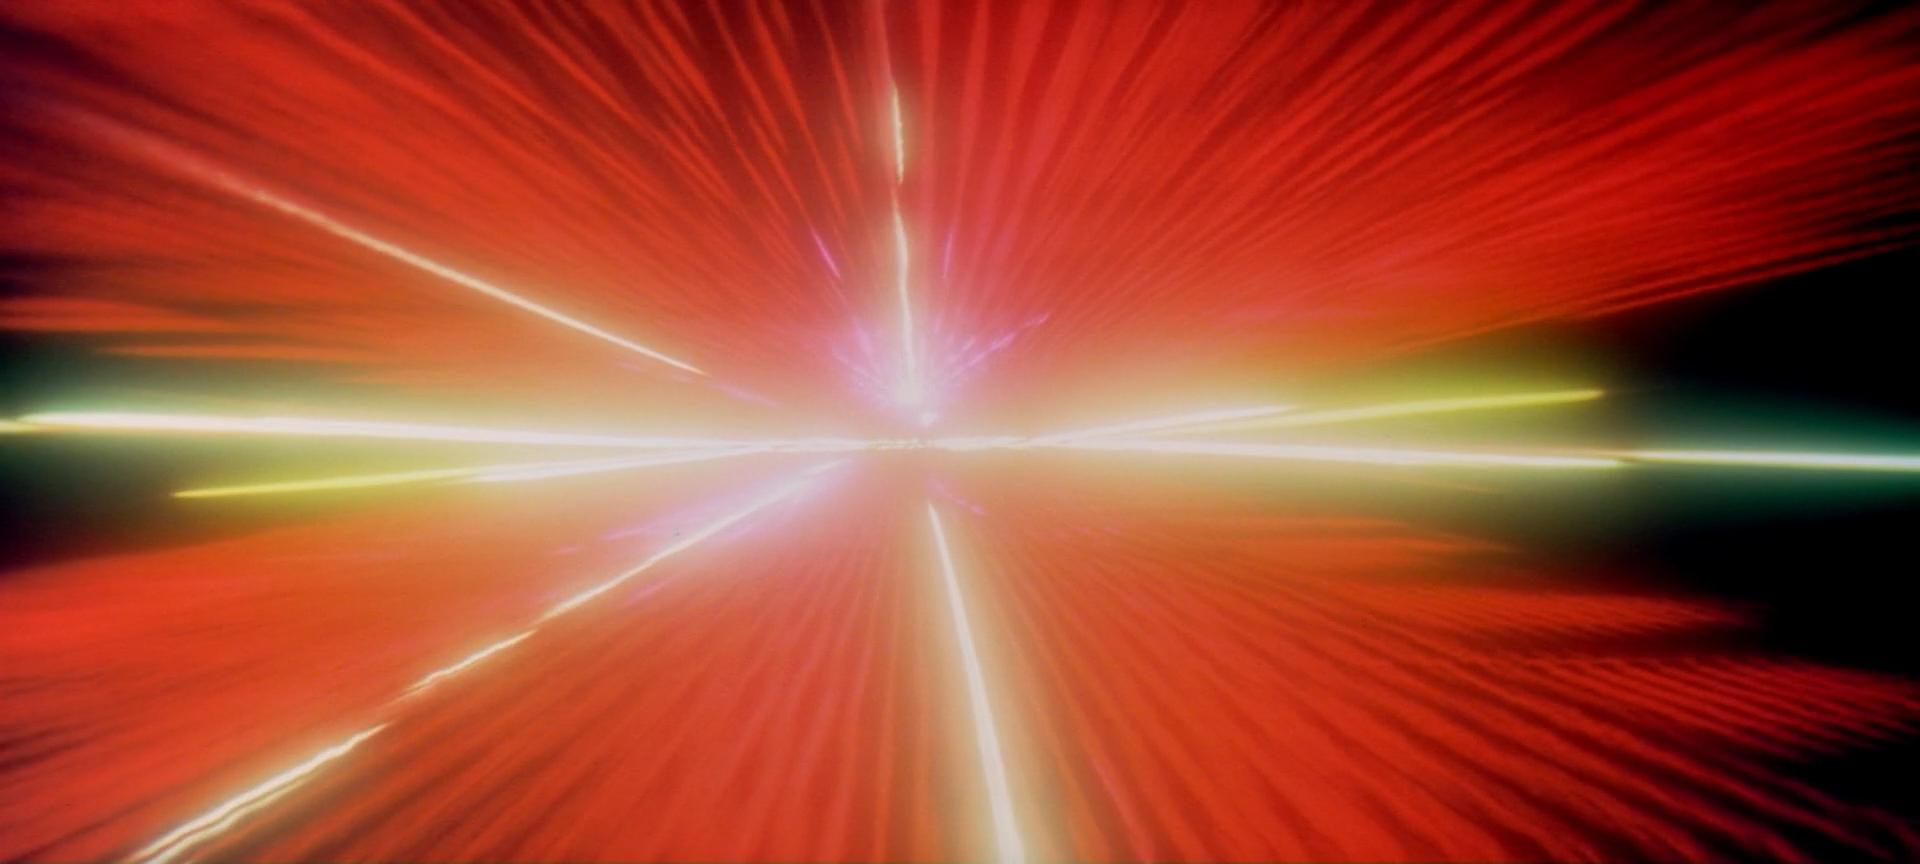 2001.A.Space.Odyssey_image_4